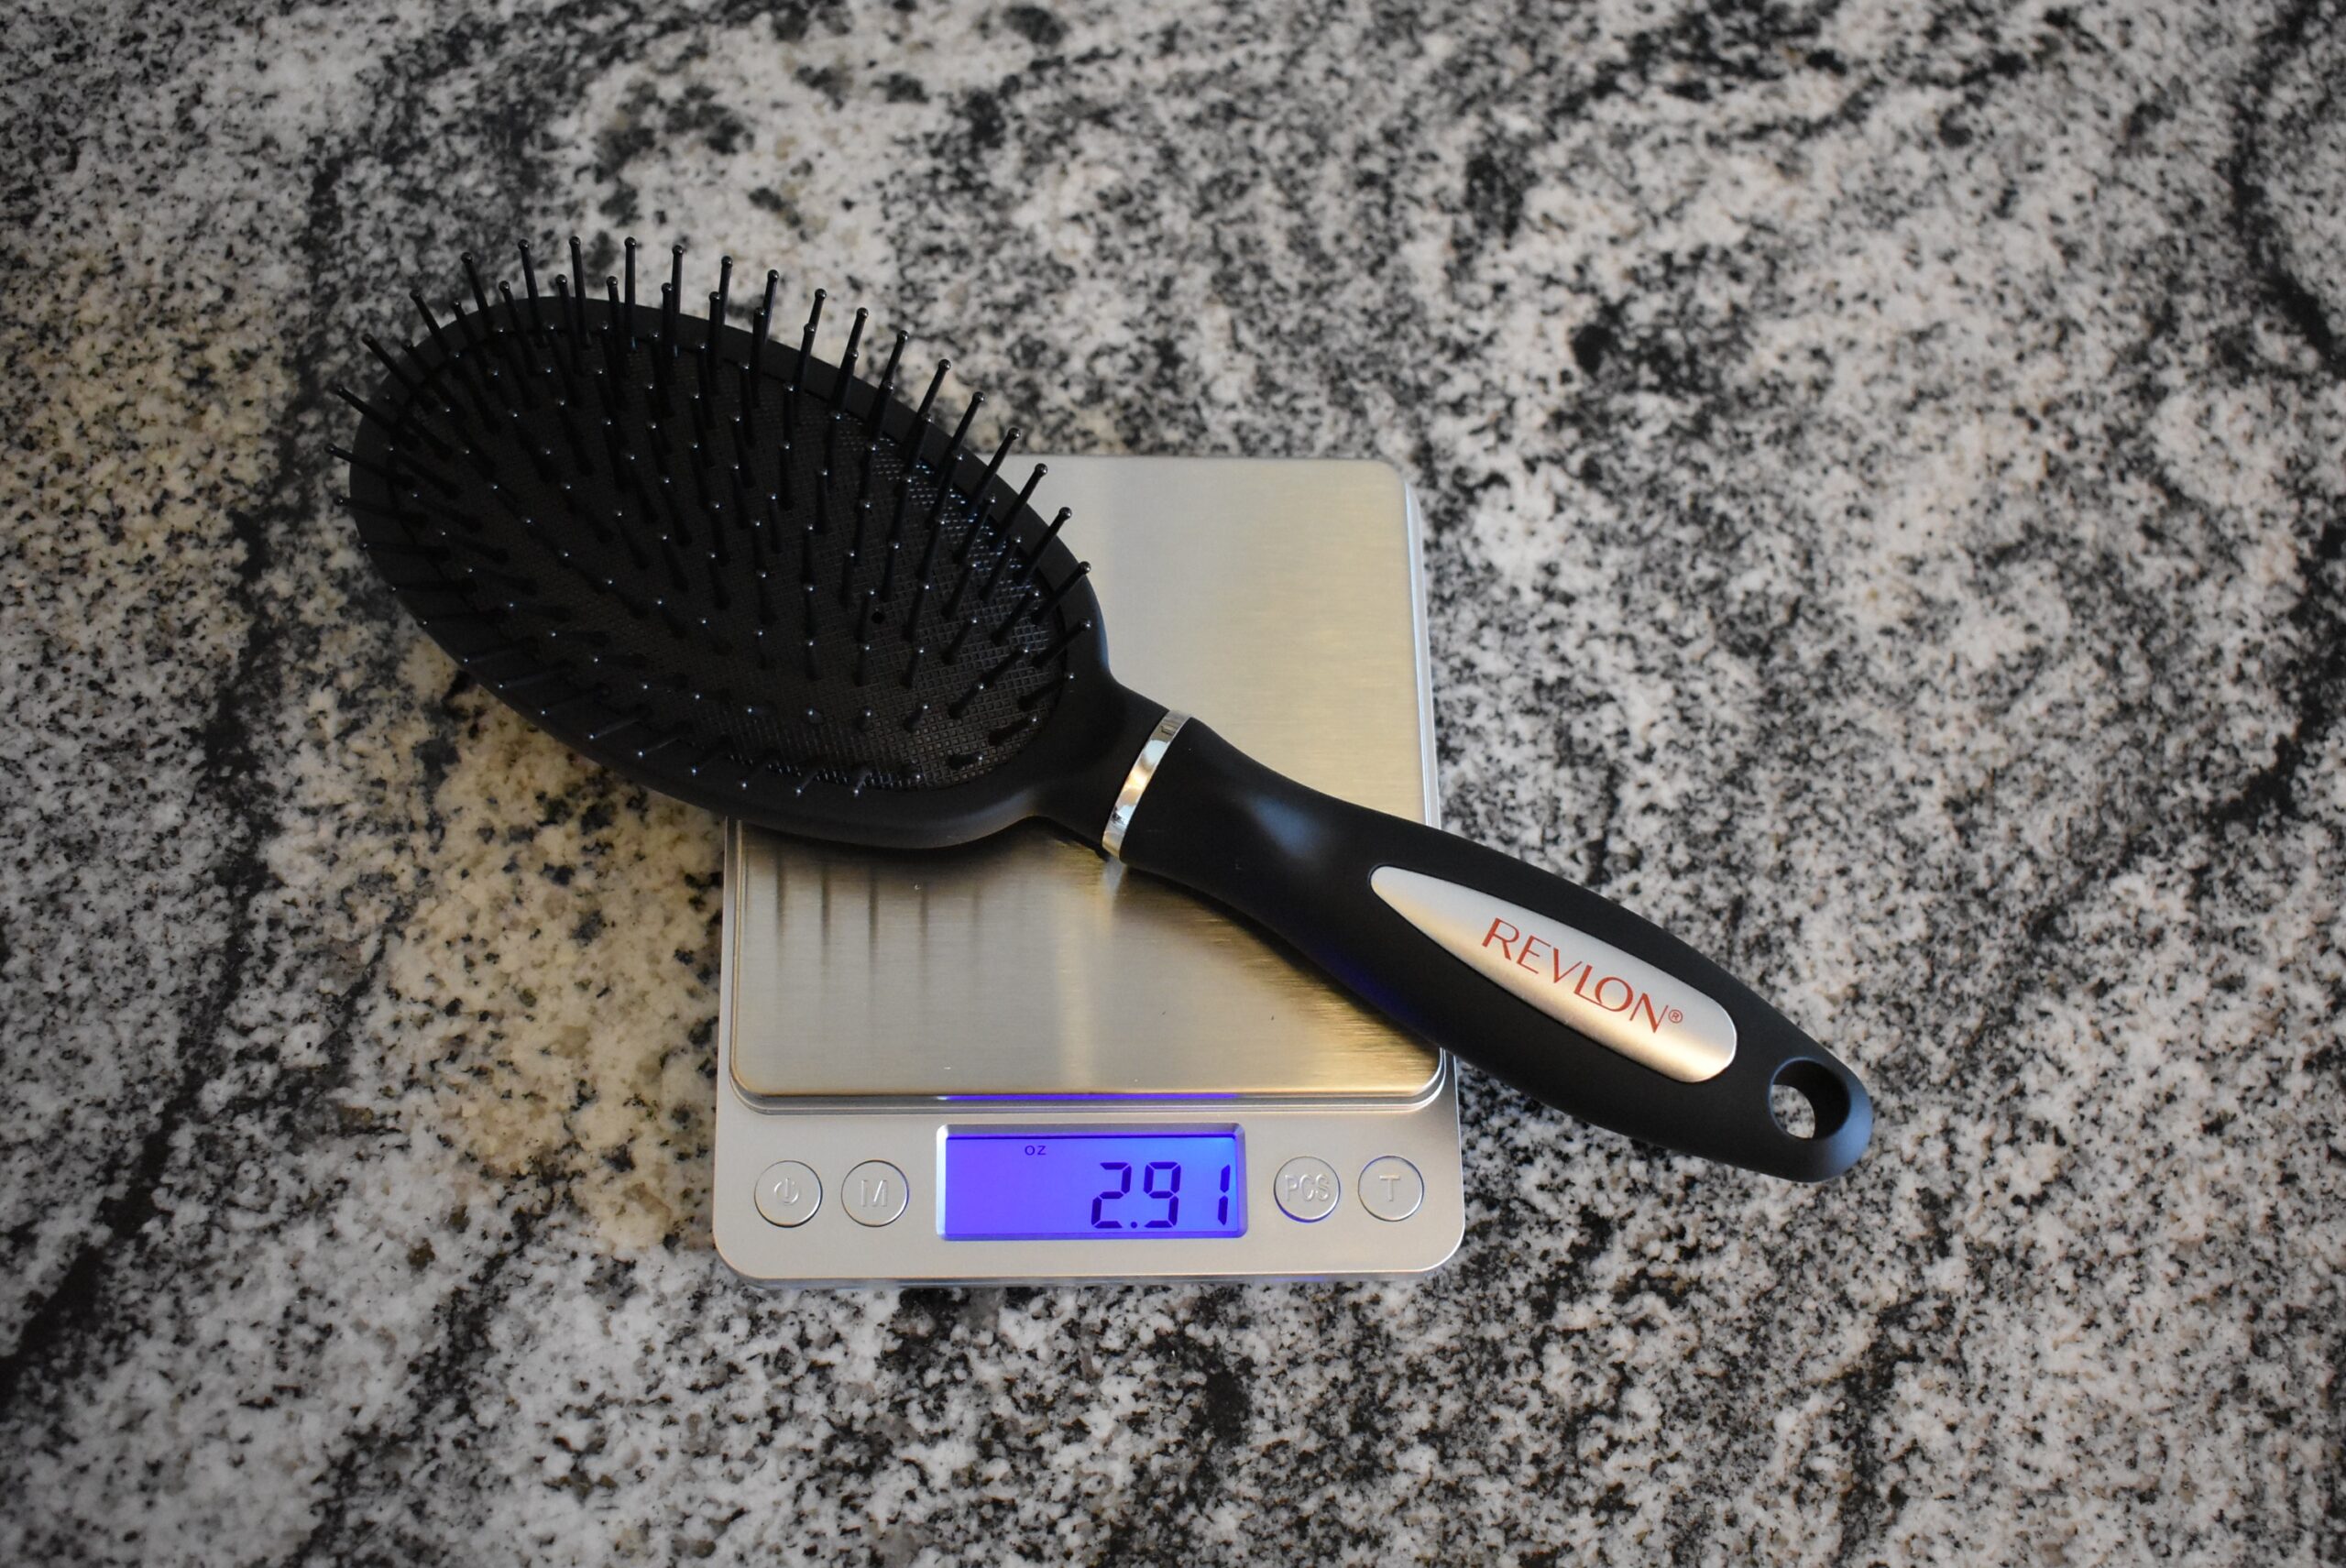 A Revlon hair brush sitting on a scale and registering 2.91 oz